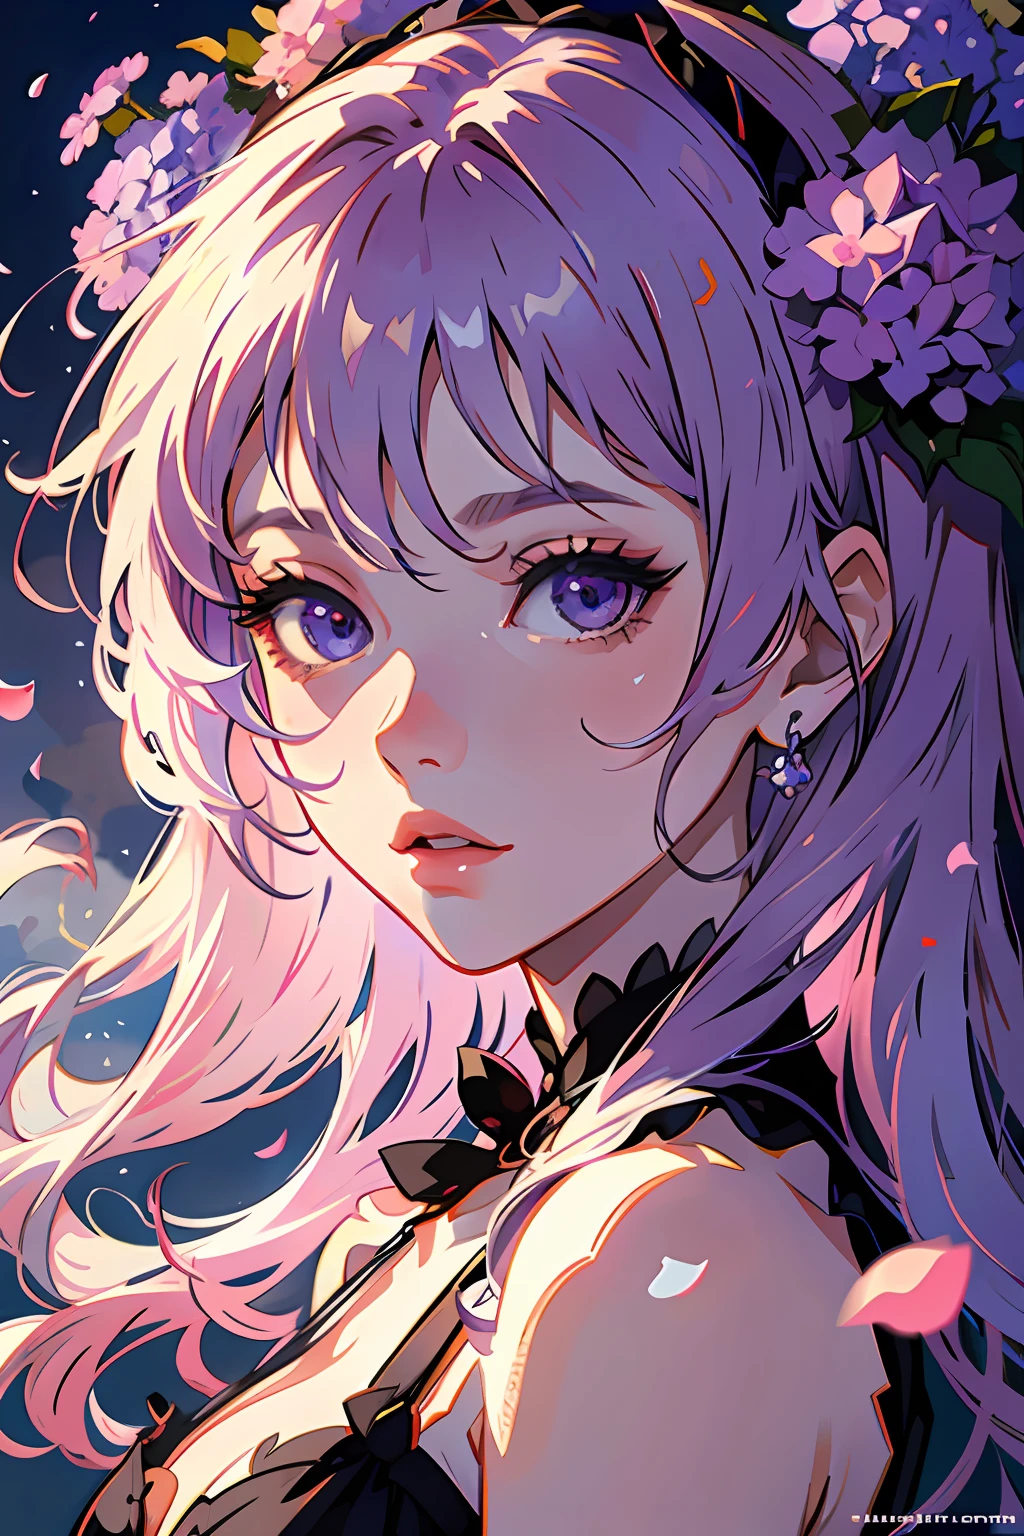 high high quality，tmasterpiece，Delicate facial features，Delicate hair，Delicate eyes，Delicate hair，animemanga girl，Wearing a pink dress with a magic wand，Flowers in the background, Purple hydrangeas, Fantastic flower garden，petals， Clouds，exteriors， huge breasts cleavage, portrait of magical girl, , Exquisite work with high degree of detail, clean and meticulous anime art, style of magical girl, High-quality anime works, 8K high quality detailed art（Delicate facial portrayal）（Fine hair portrayal）（highest  quality）（Master masterpieces）（High degree of completion）（a sense of atmosphere）8k wallpaper，tmasterpiece，Best quality at best，ultra - detailed